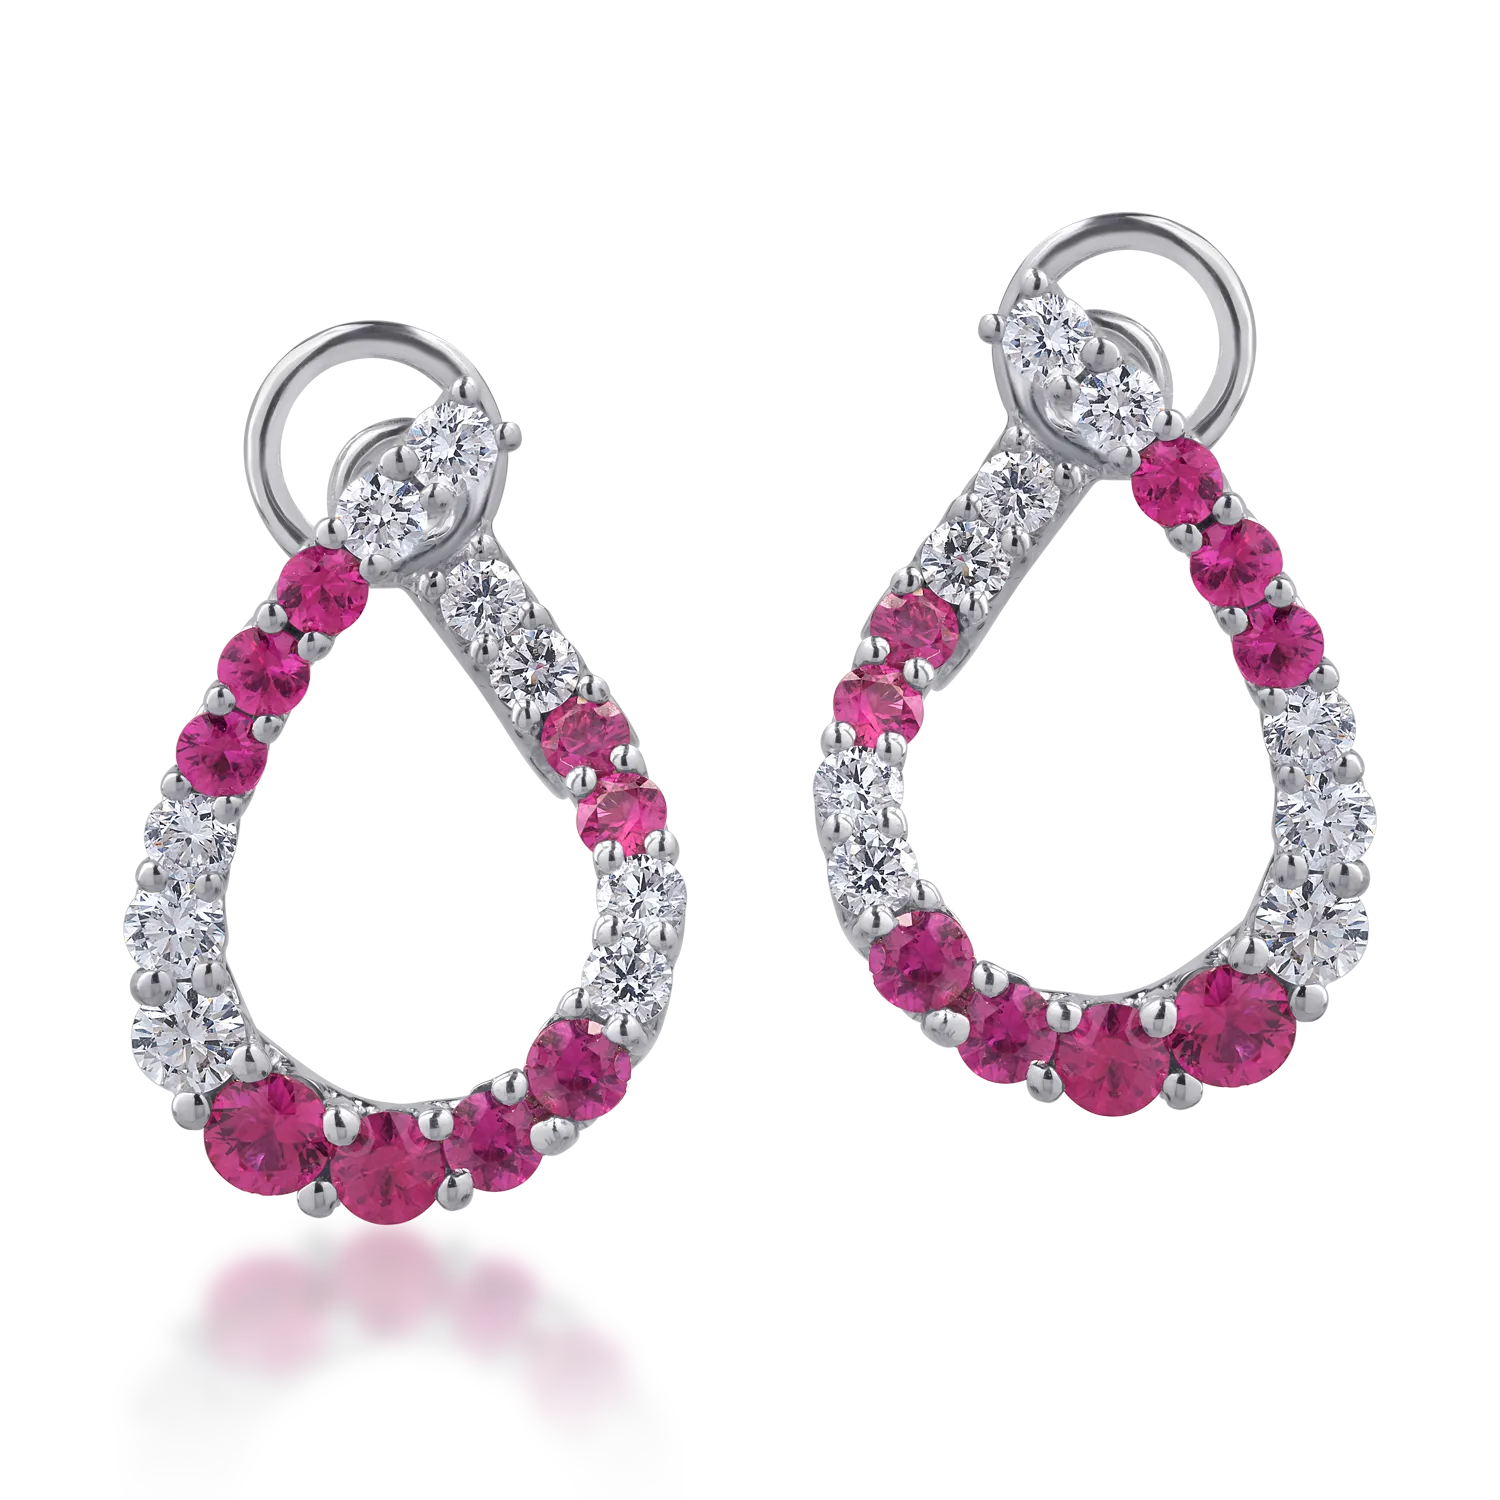 18K white gold earrings with 1.55ct rubies and 1.09ct diamonds